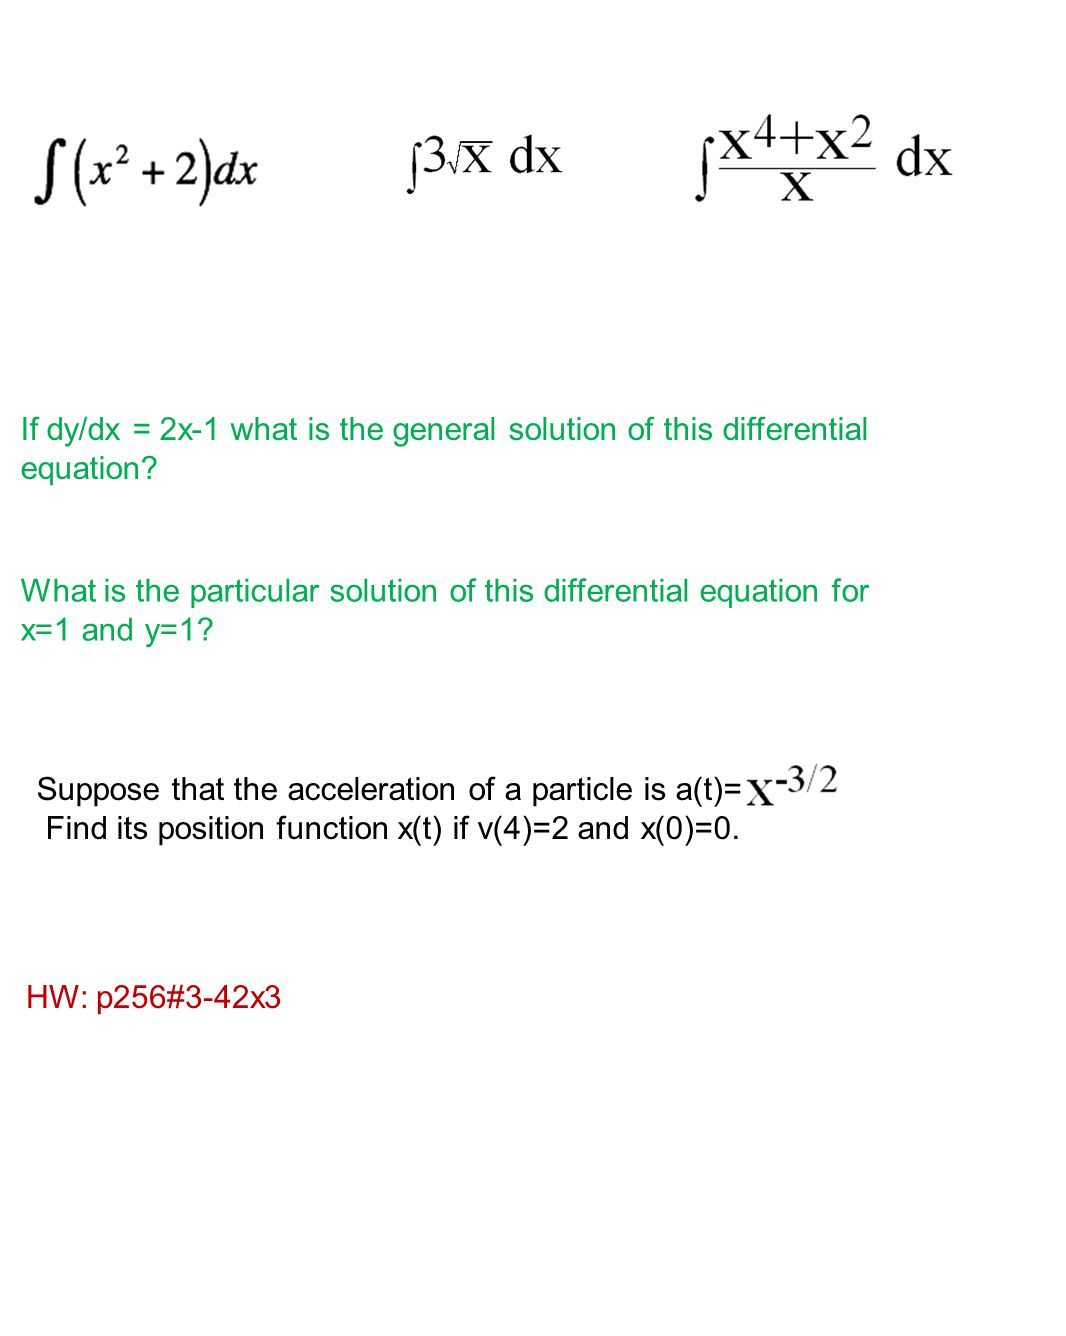 If dy/dx = 2x-1 what is the general solution of this differential equation.